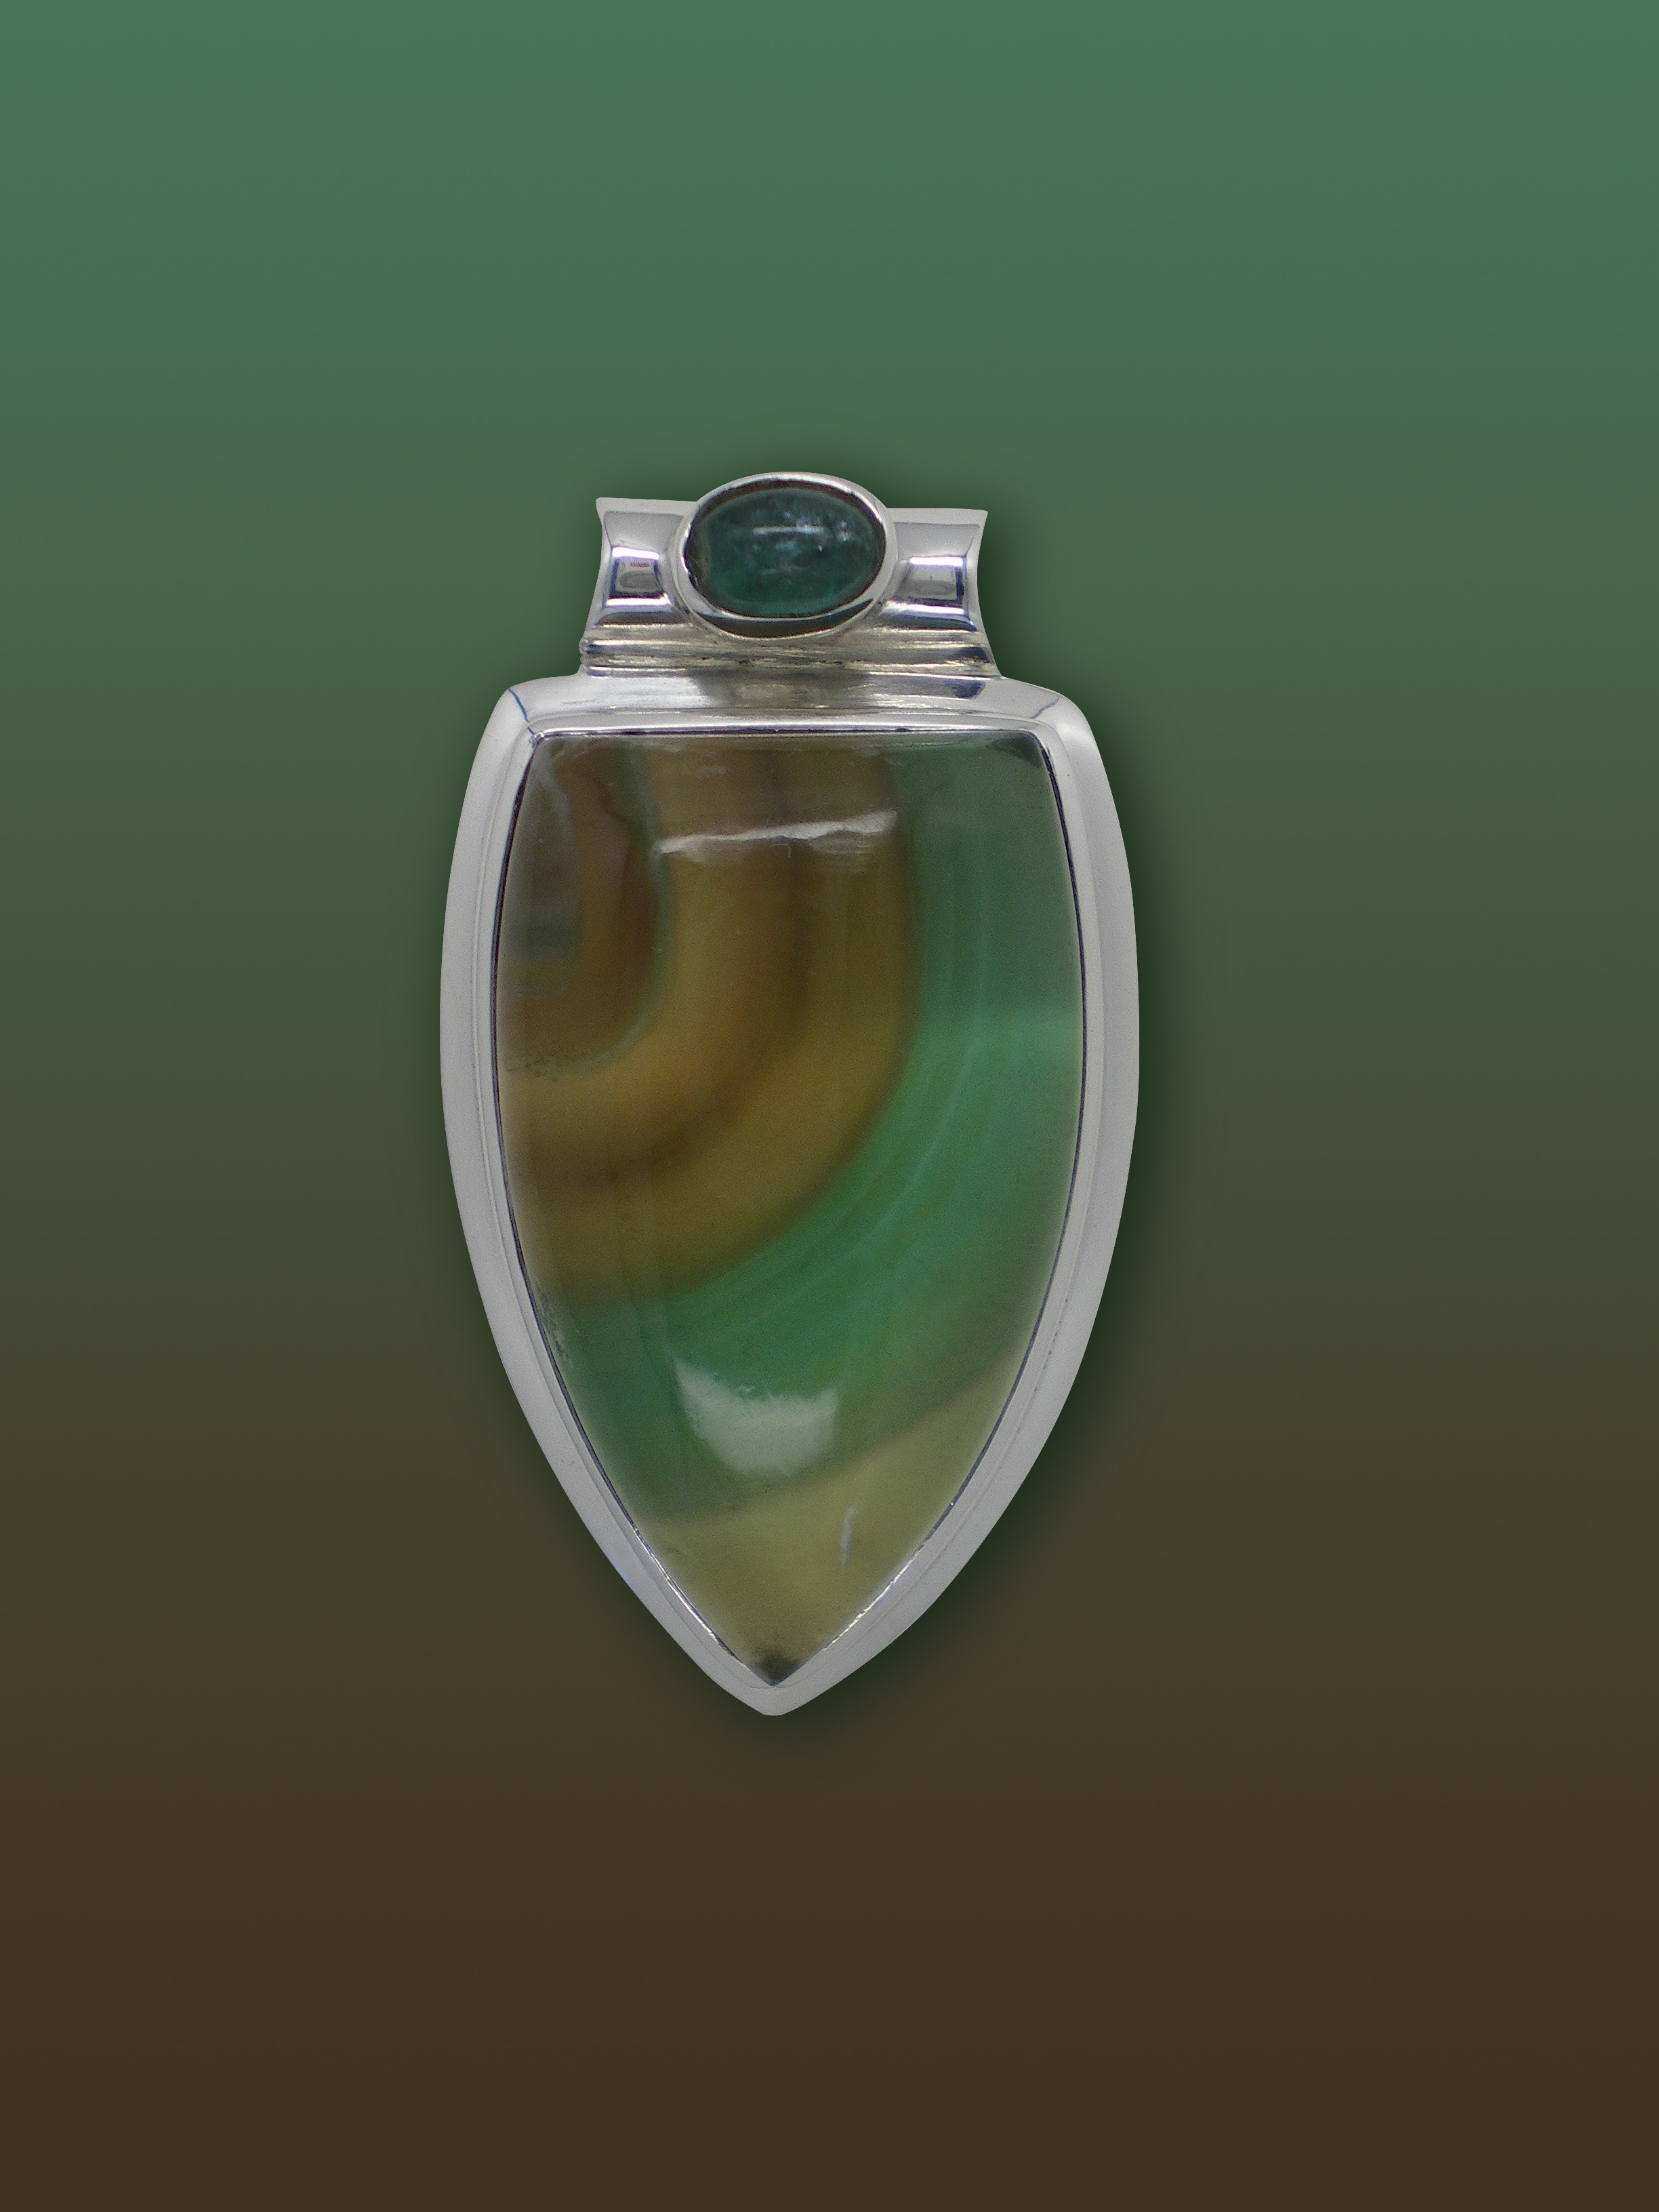 Gem, Jewellery, Trailers, Agate, green color, no people